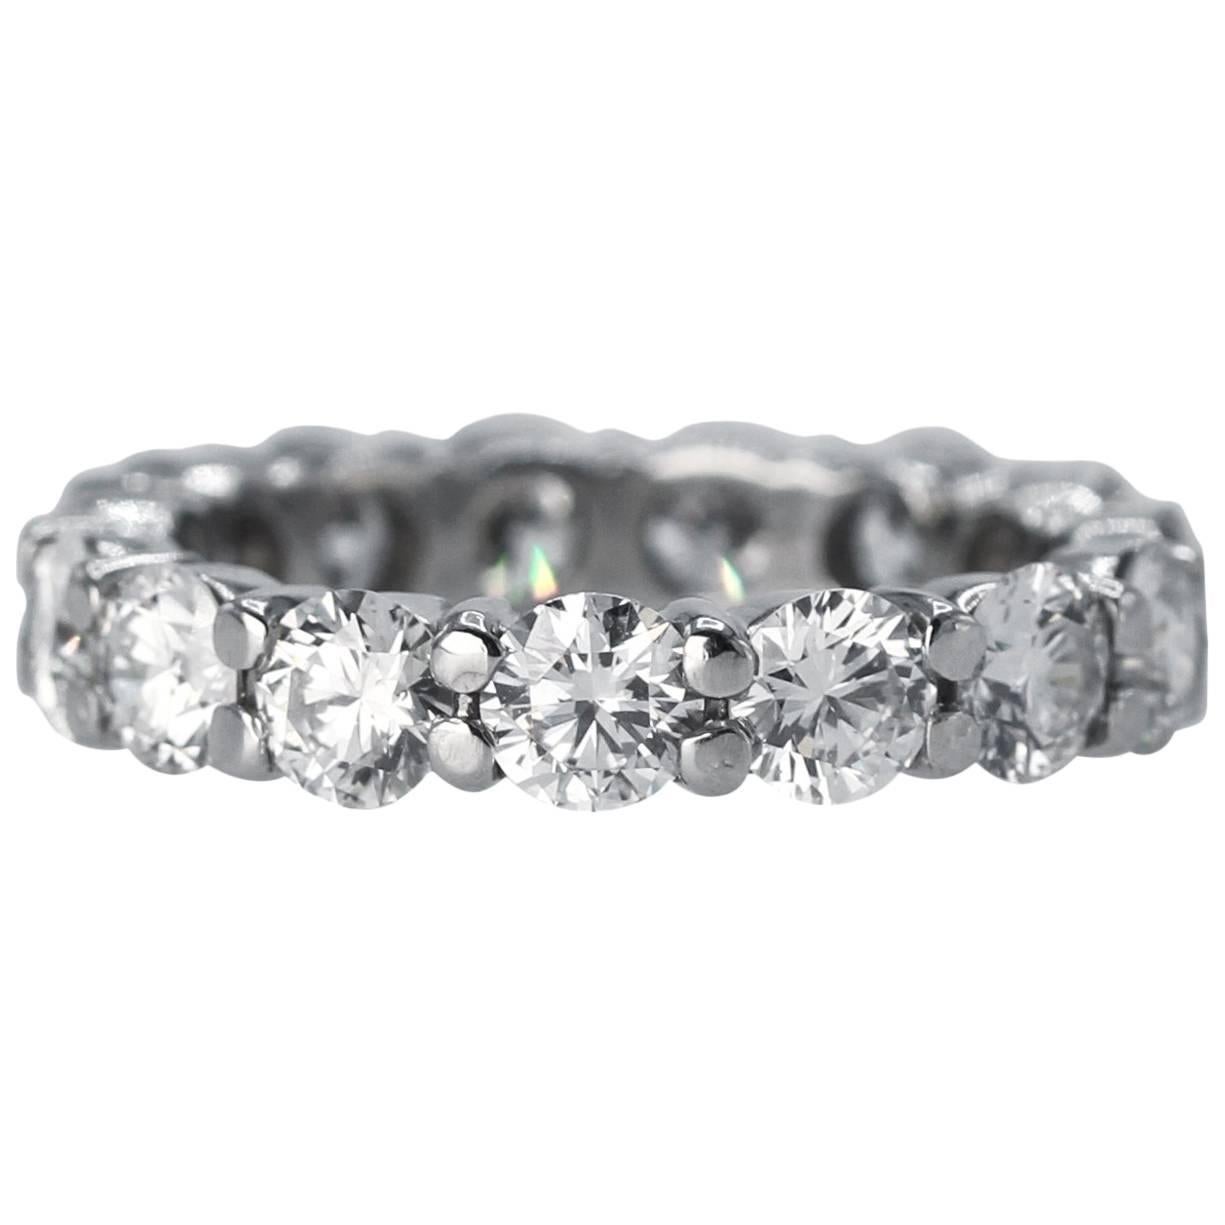 4.00 Carat Diamond Eternity Band Ring For Sale